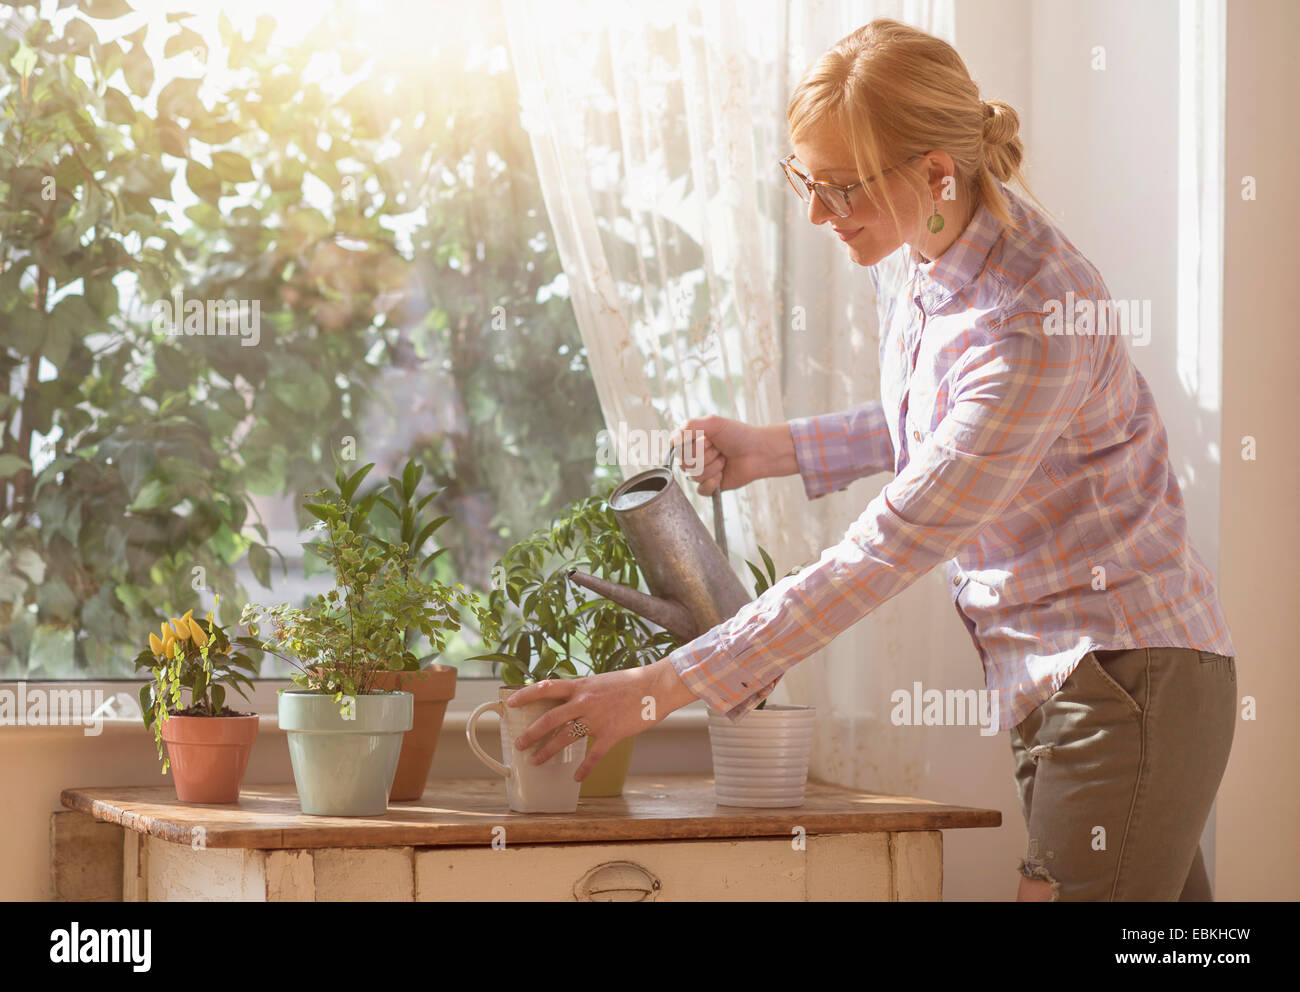 Woman watering plants in living room Banque D'Images